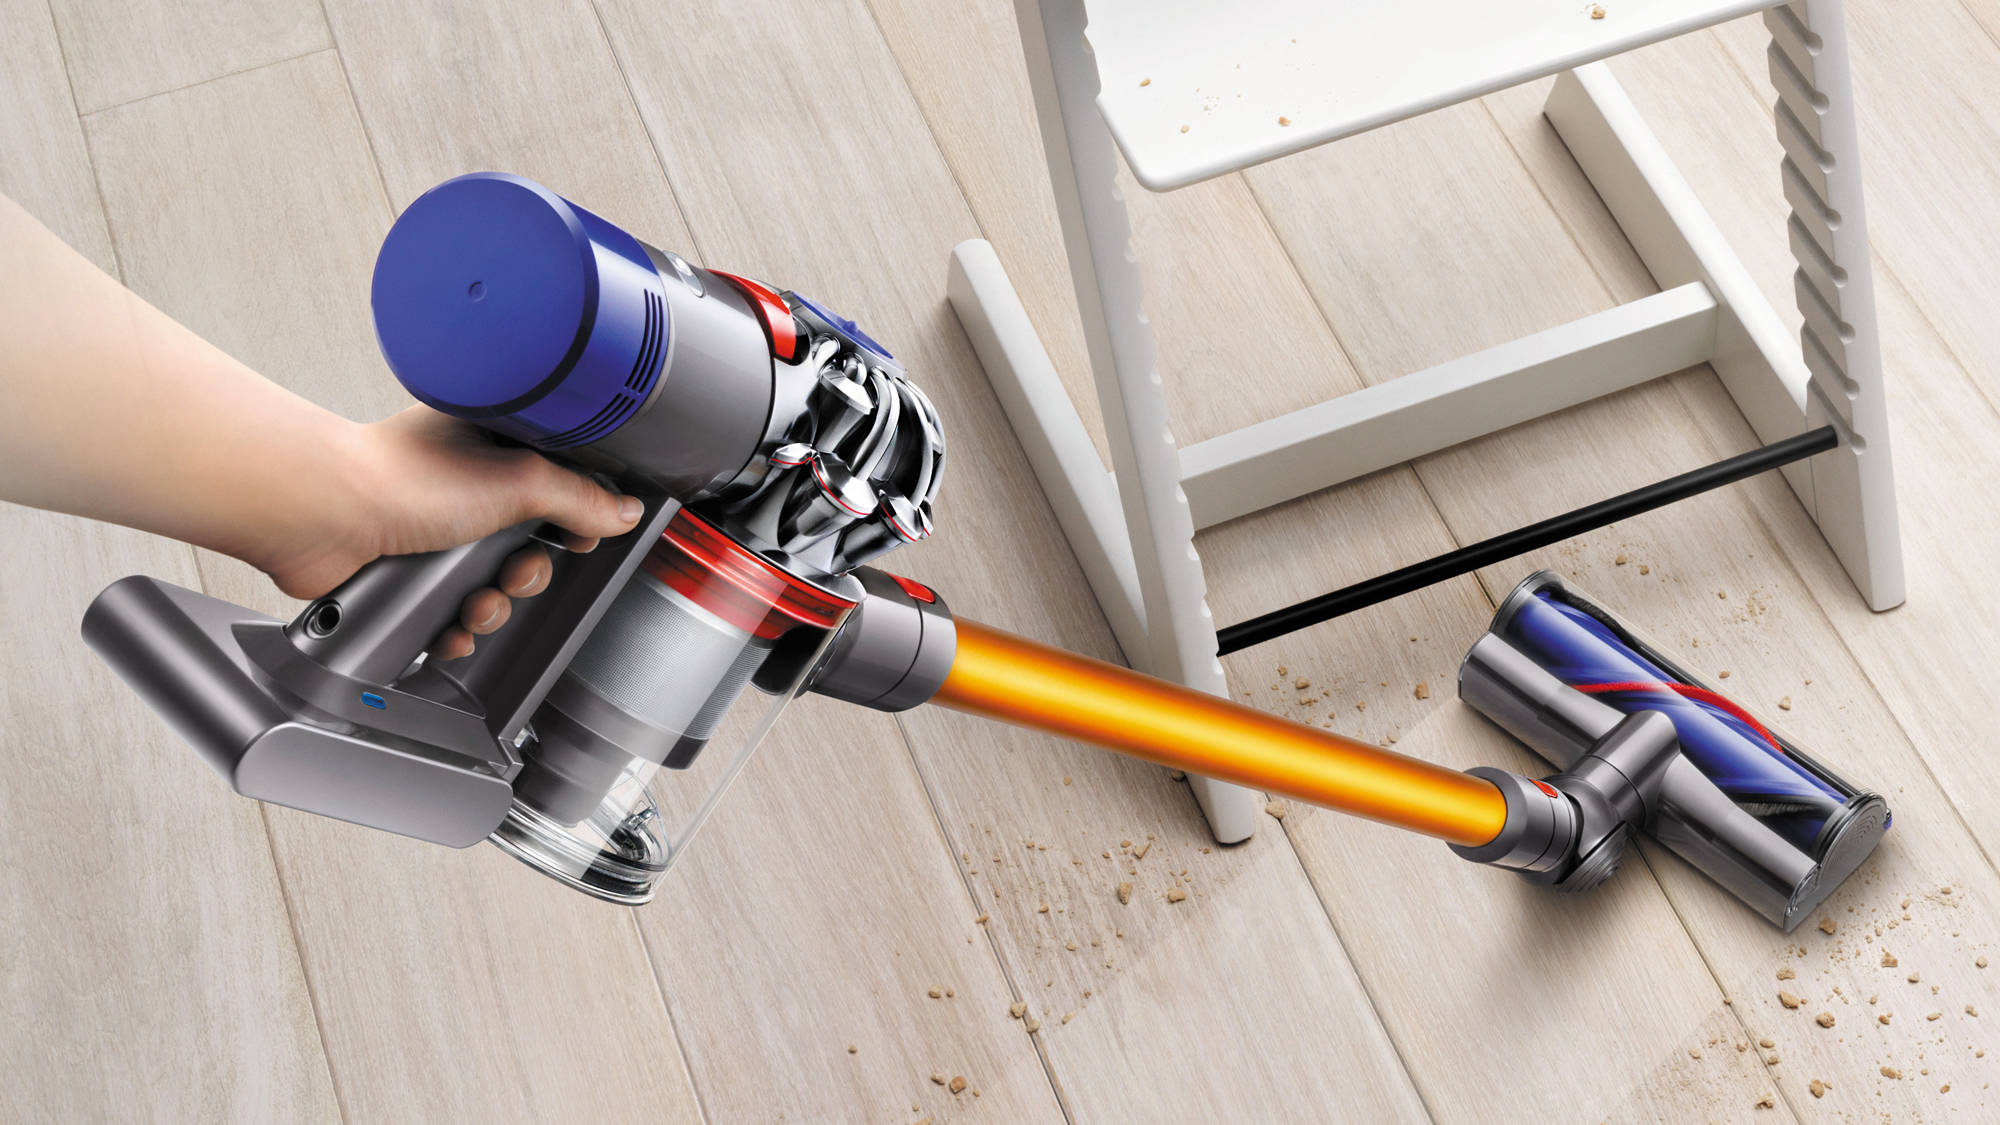 The Dyson V8 Absolute is big on performance, looks and price